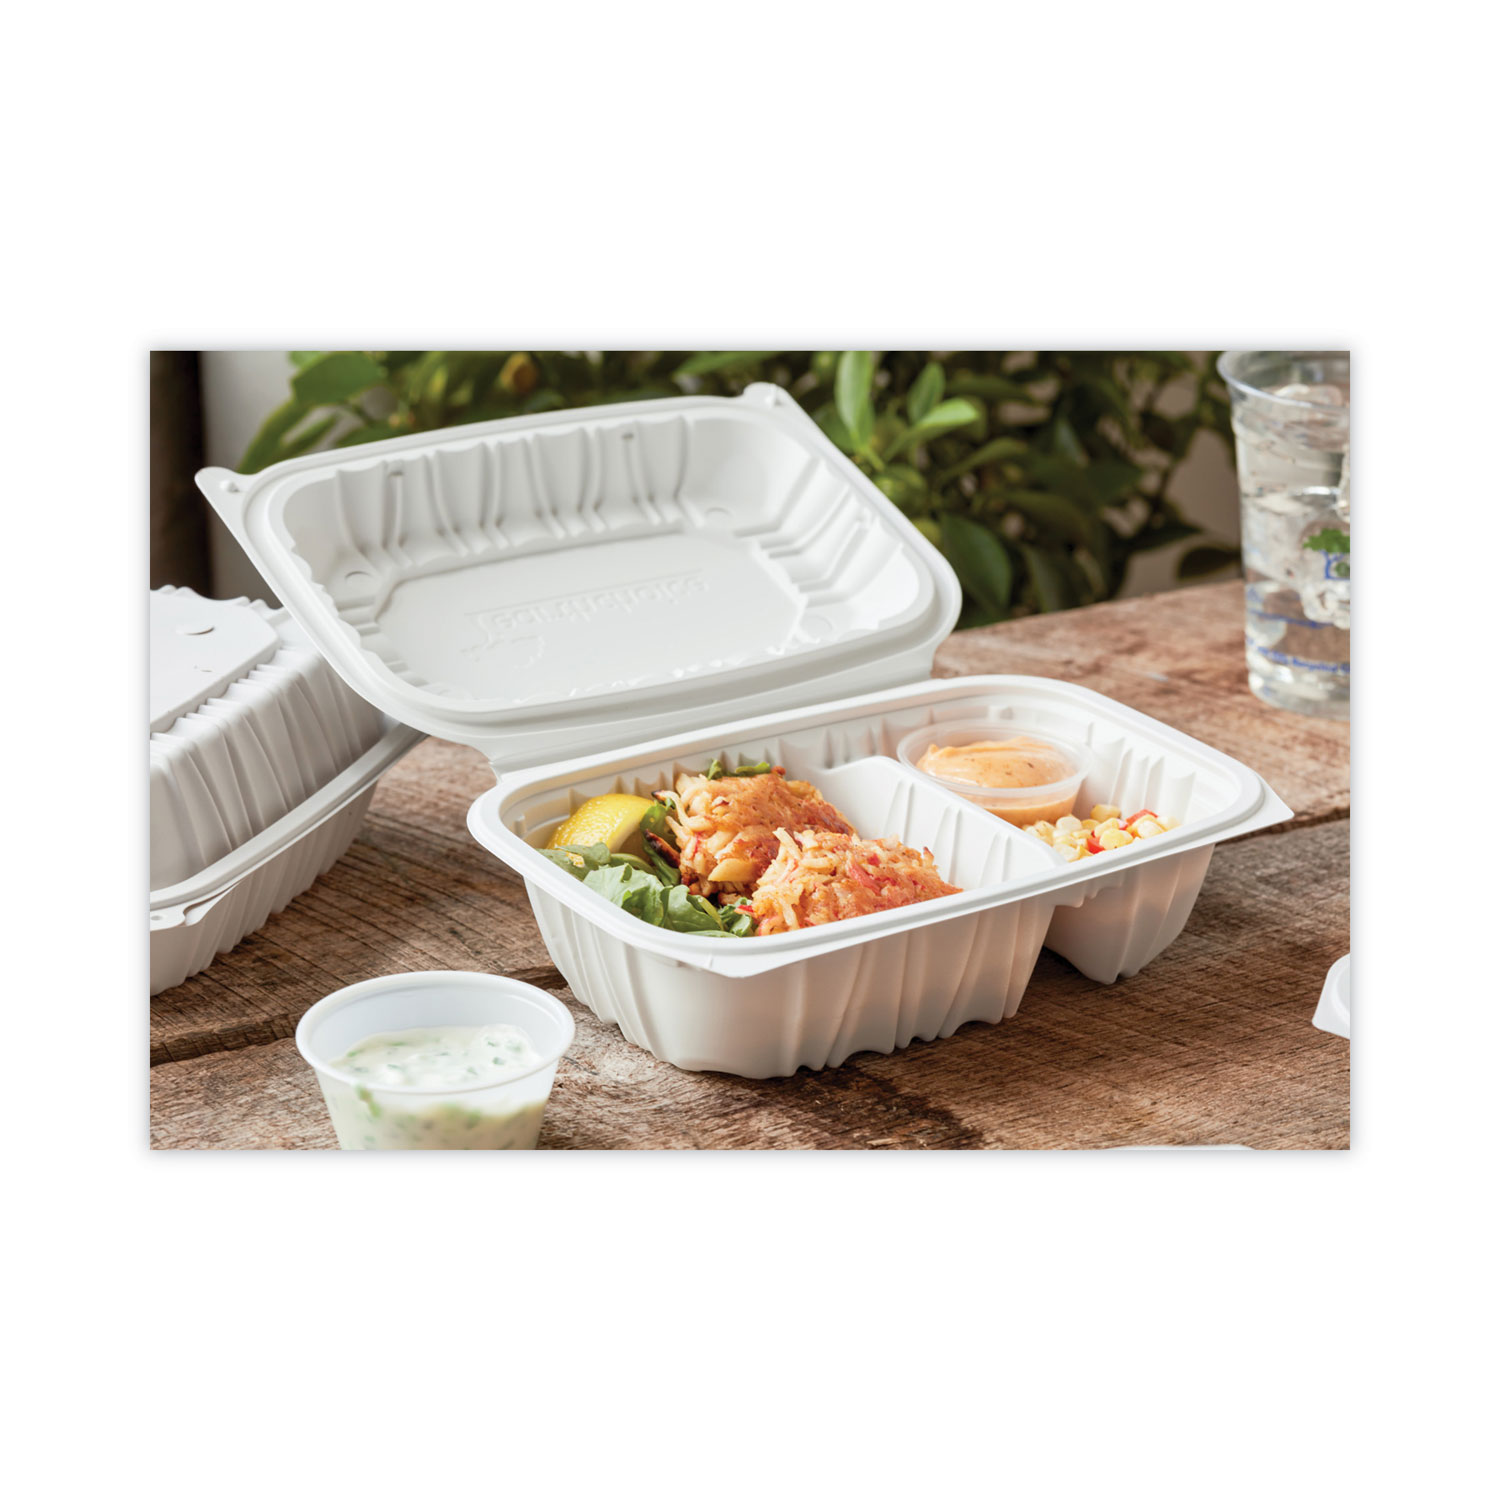 EarthChoice Tamper Evident Recycled Hinged Lid Deli Container by Pactiv  PCTTEHL5X416